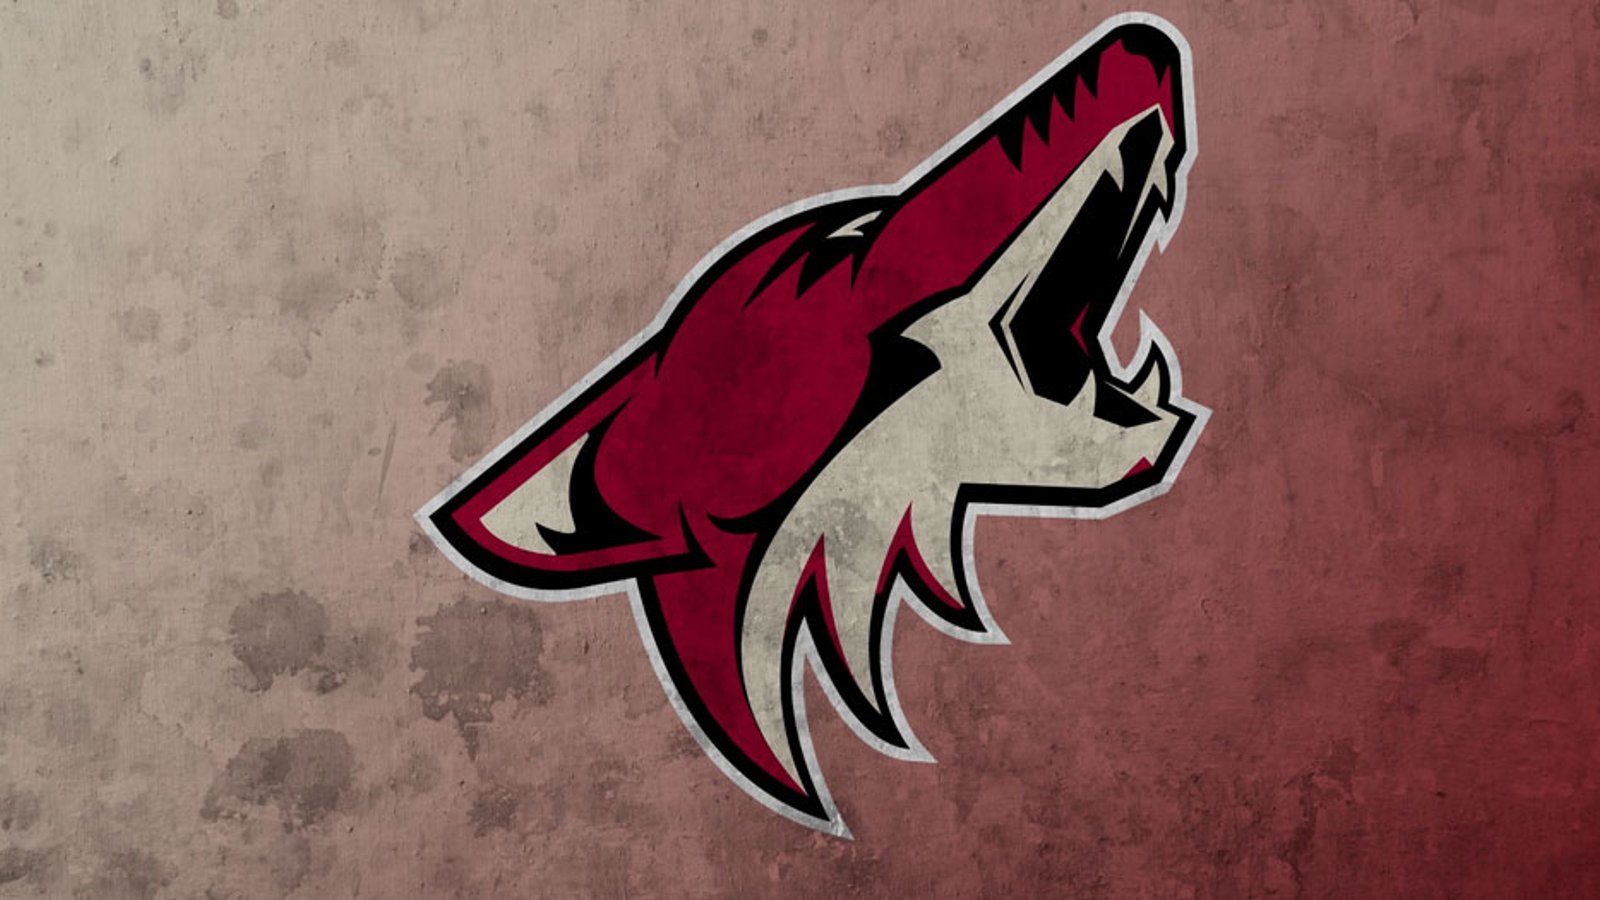 Coyotes reportedly under investigation by the NHL for alleged illegal scouting/drafting techniques